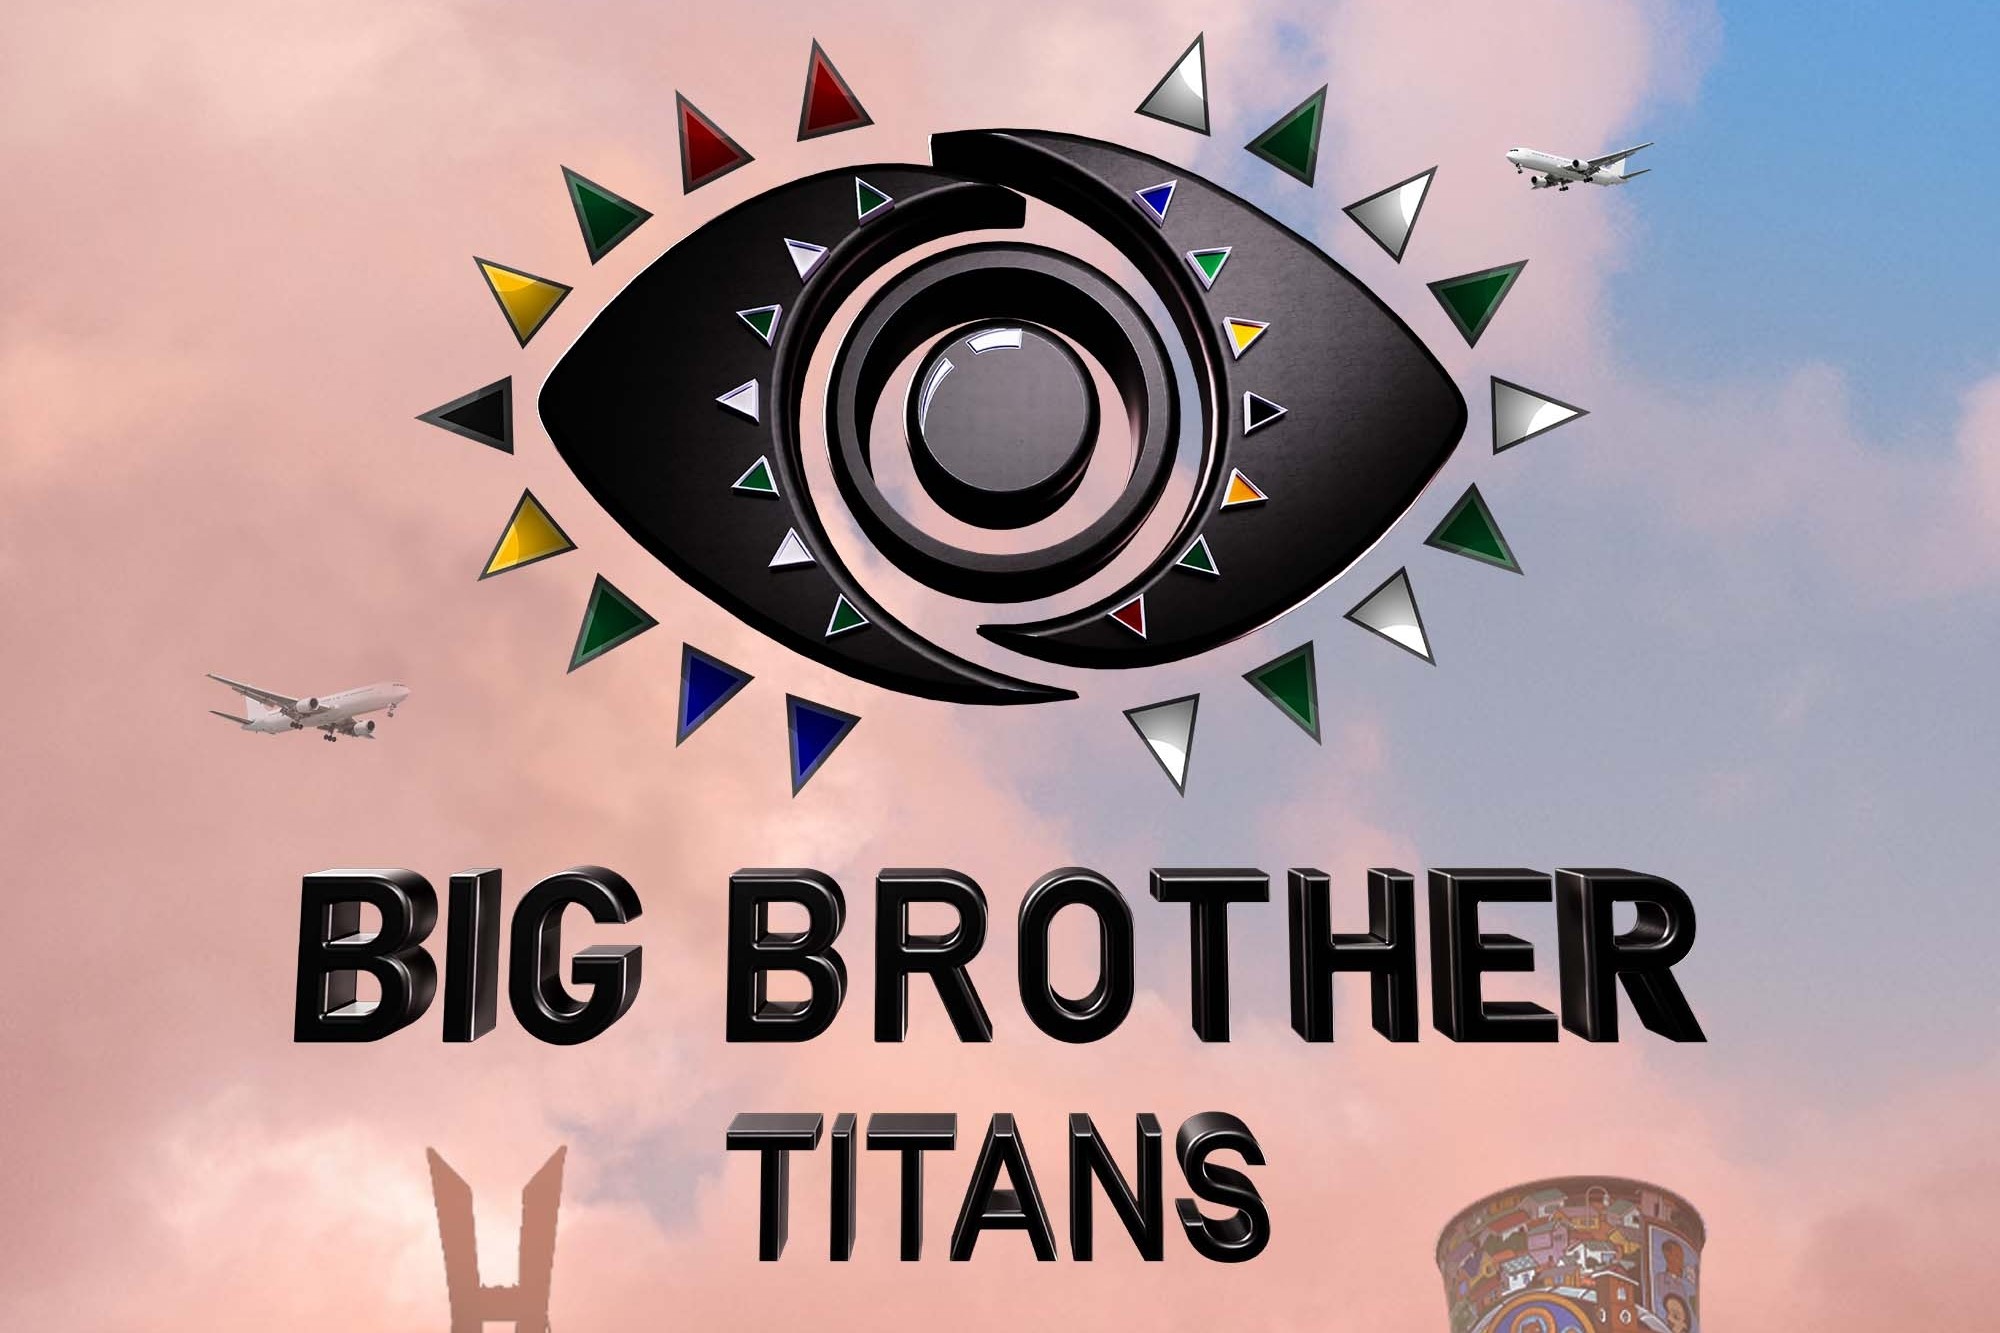 Big Brother Titans News For Today Monday 16th January 2023